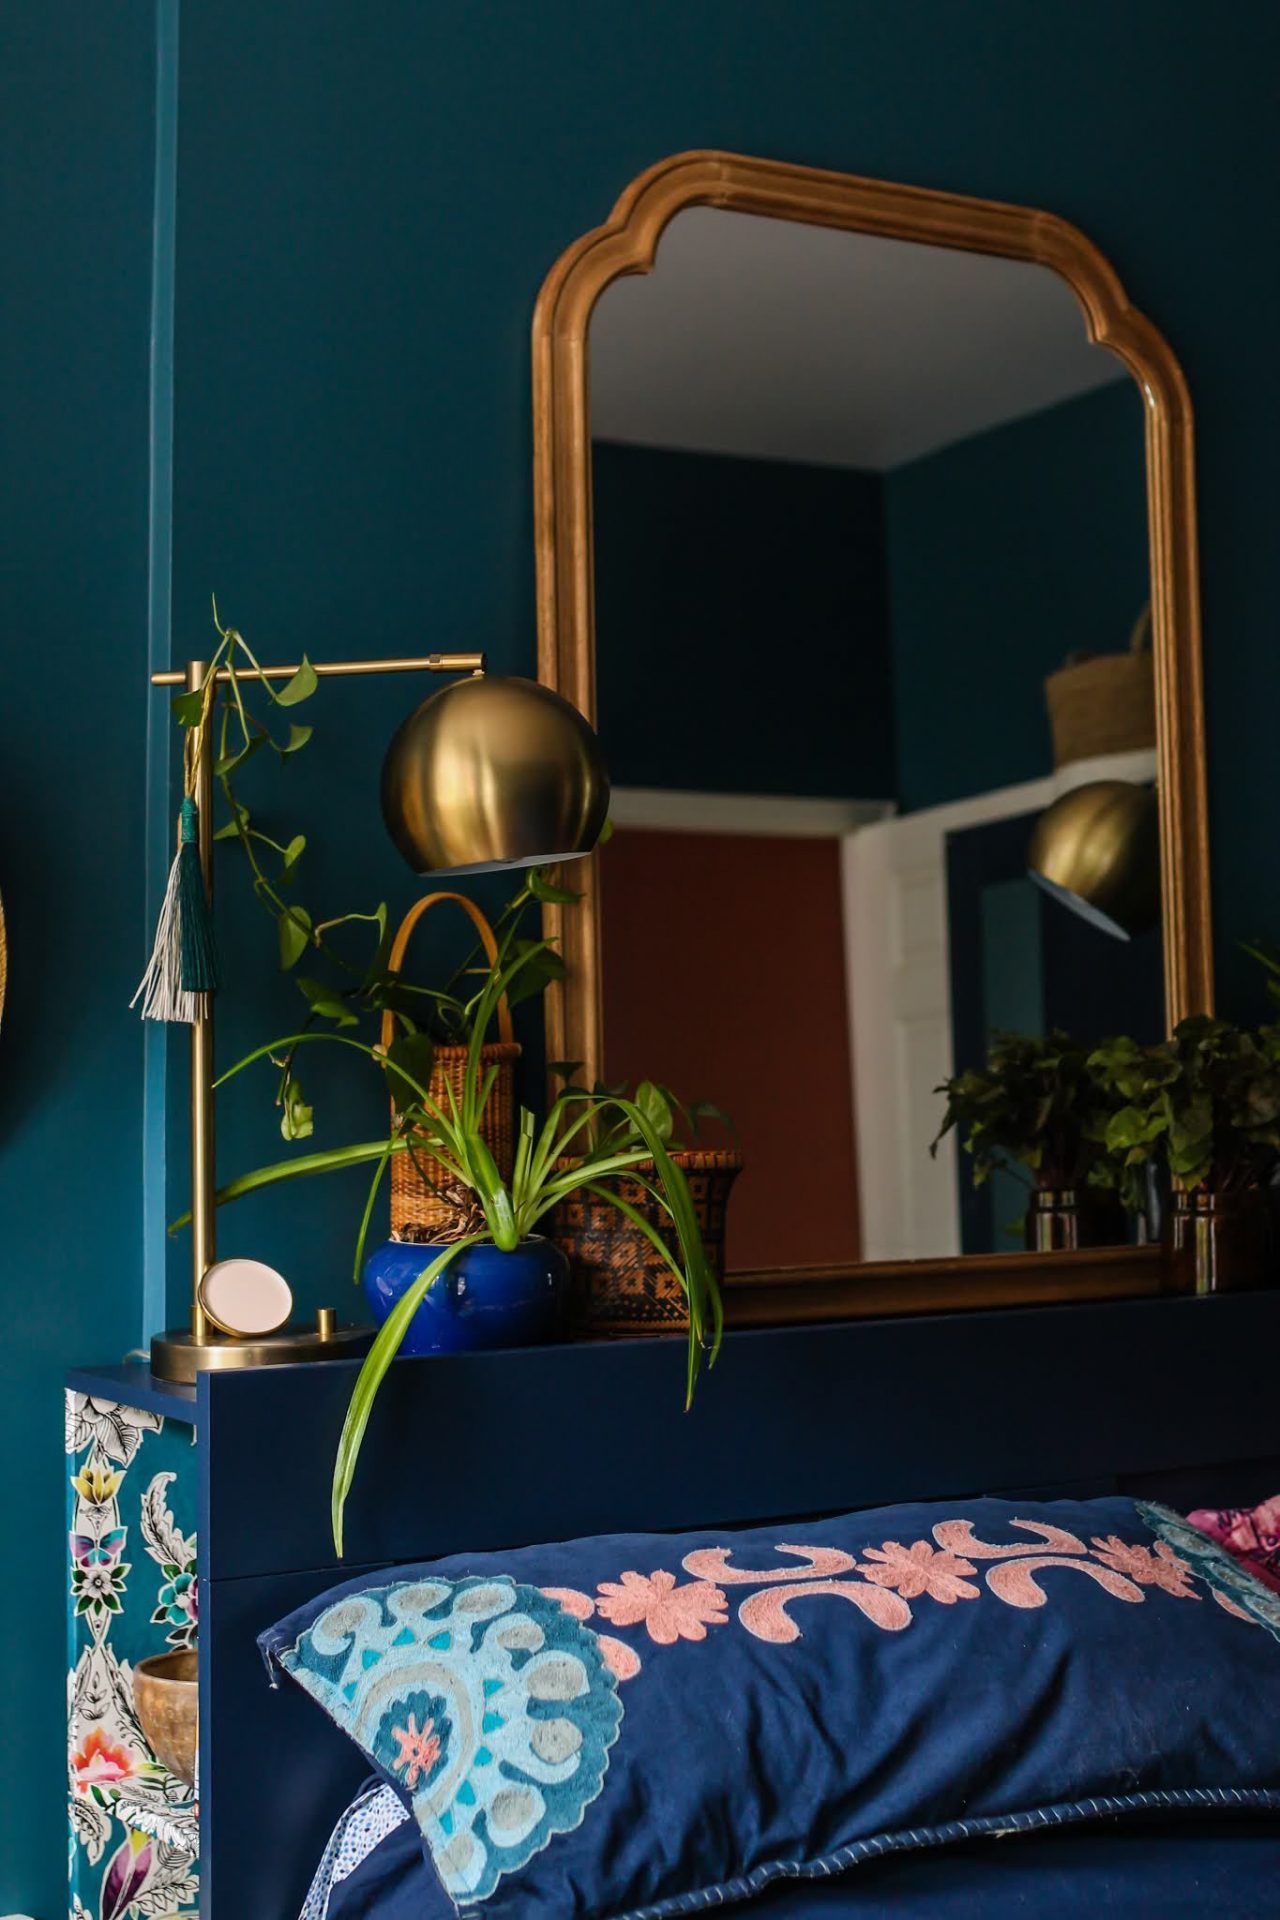 Photo of a mirror in the headboard of a dark colored room